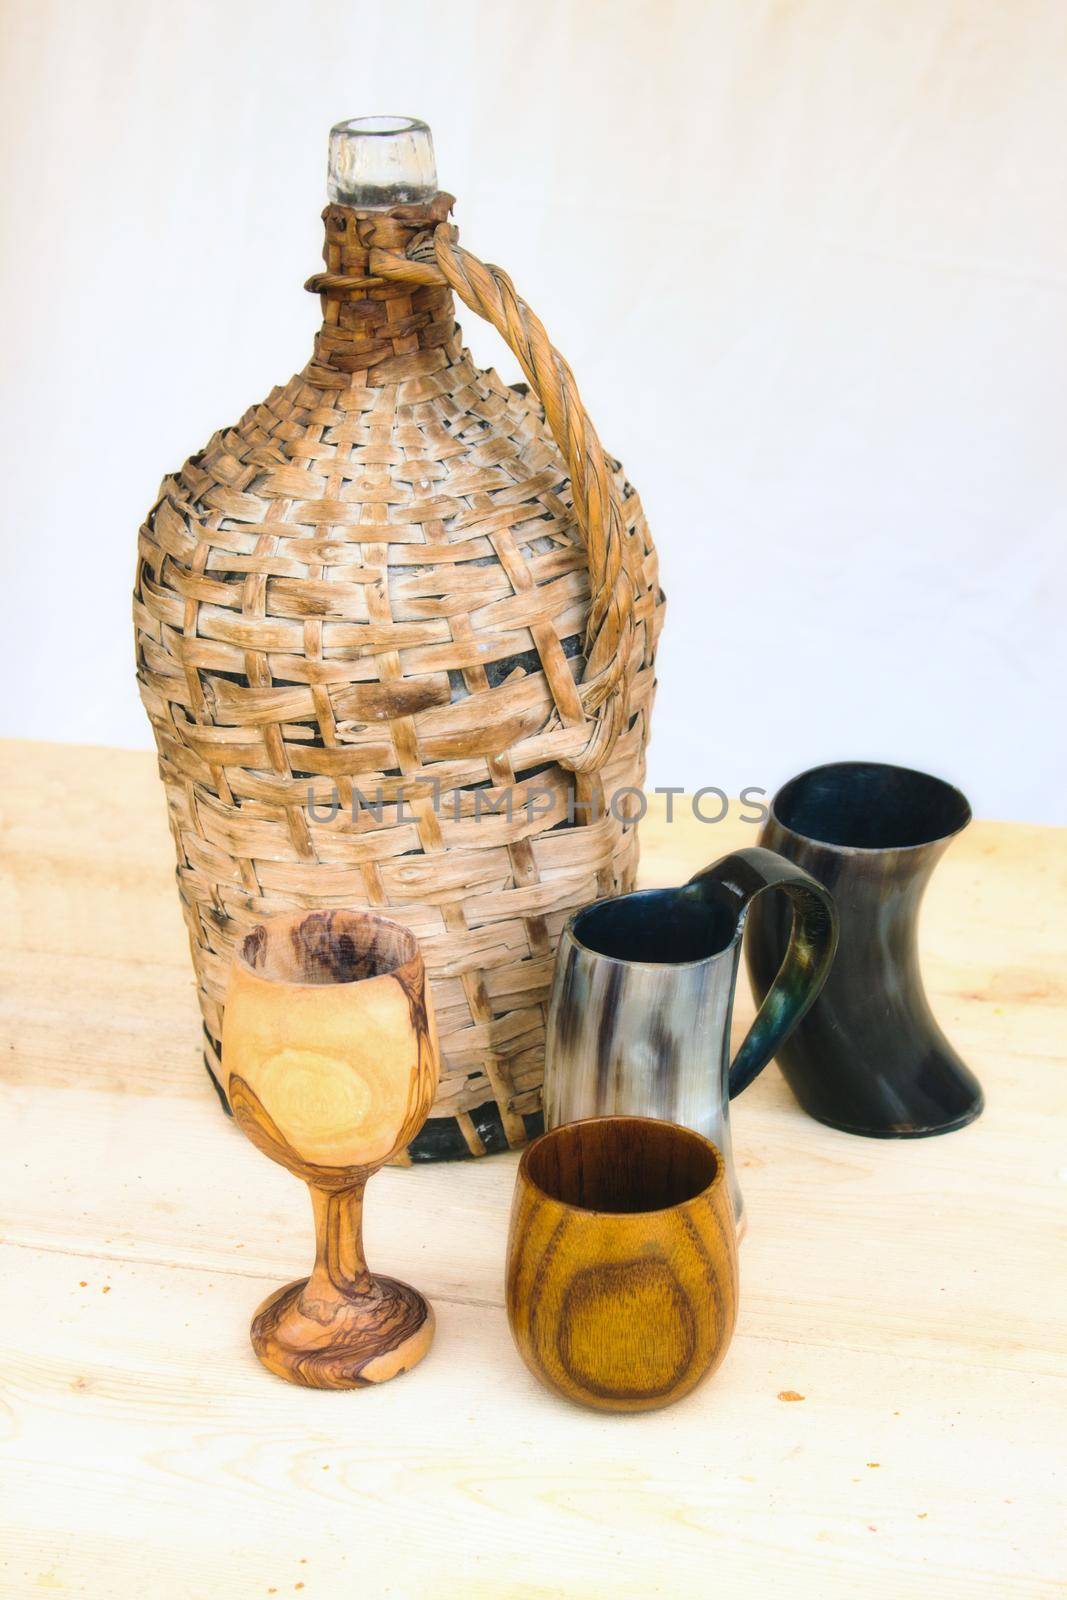 A traditional glass bottle encased in wicker with wooden cups on a table by tennesseewitney